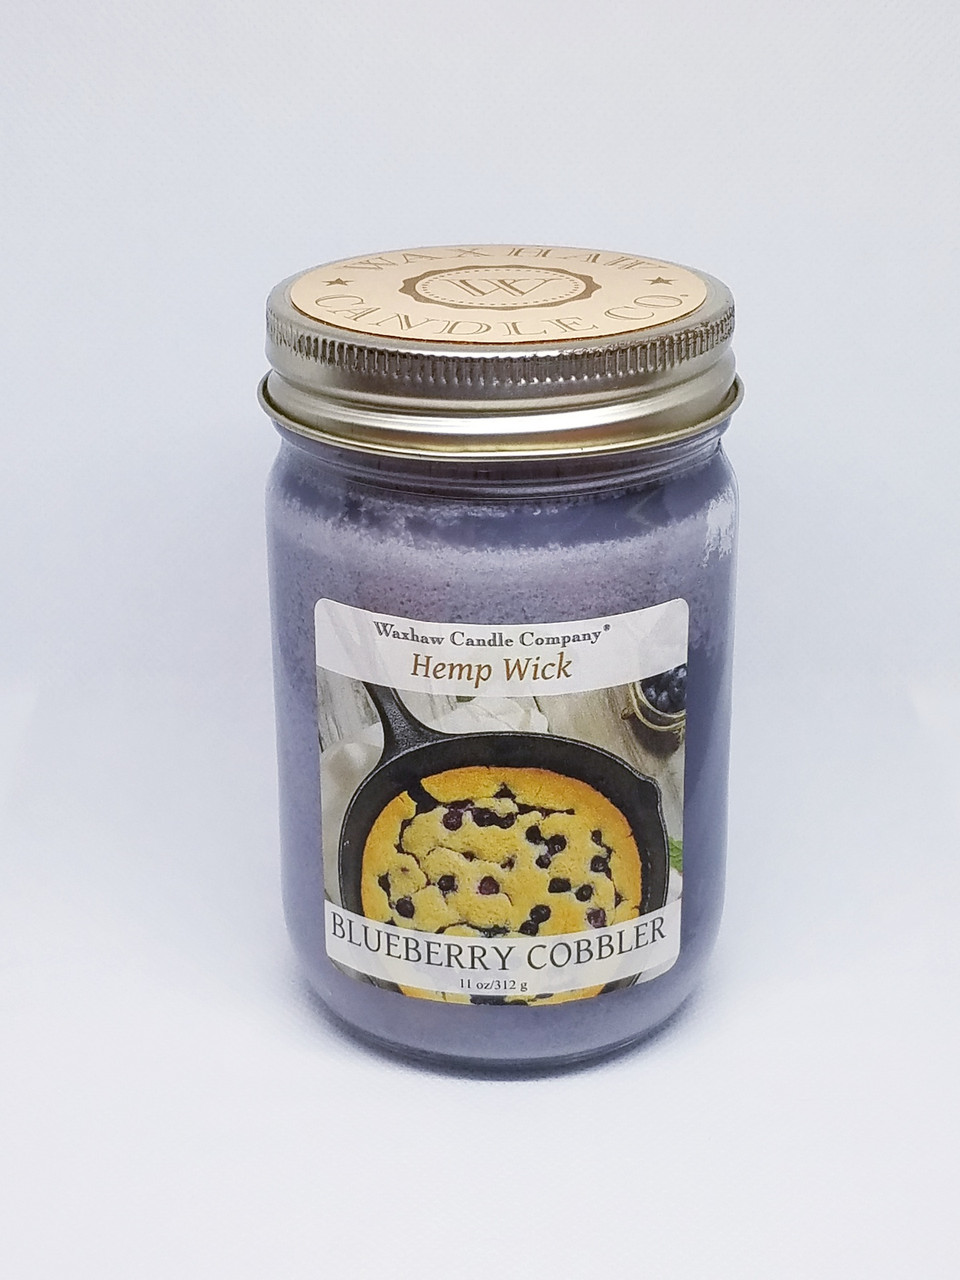 Blueberry Cobbler Candle - Hemp Wick - Waxhaw Candle Co.